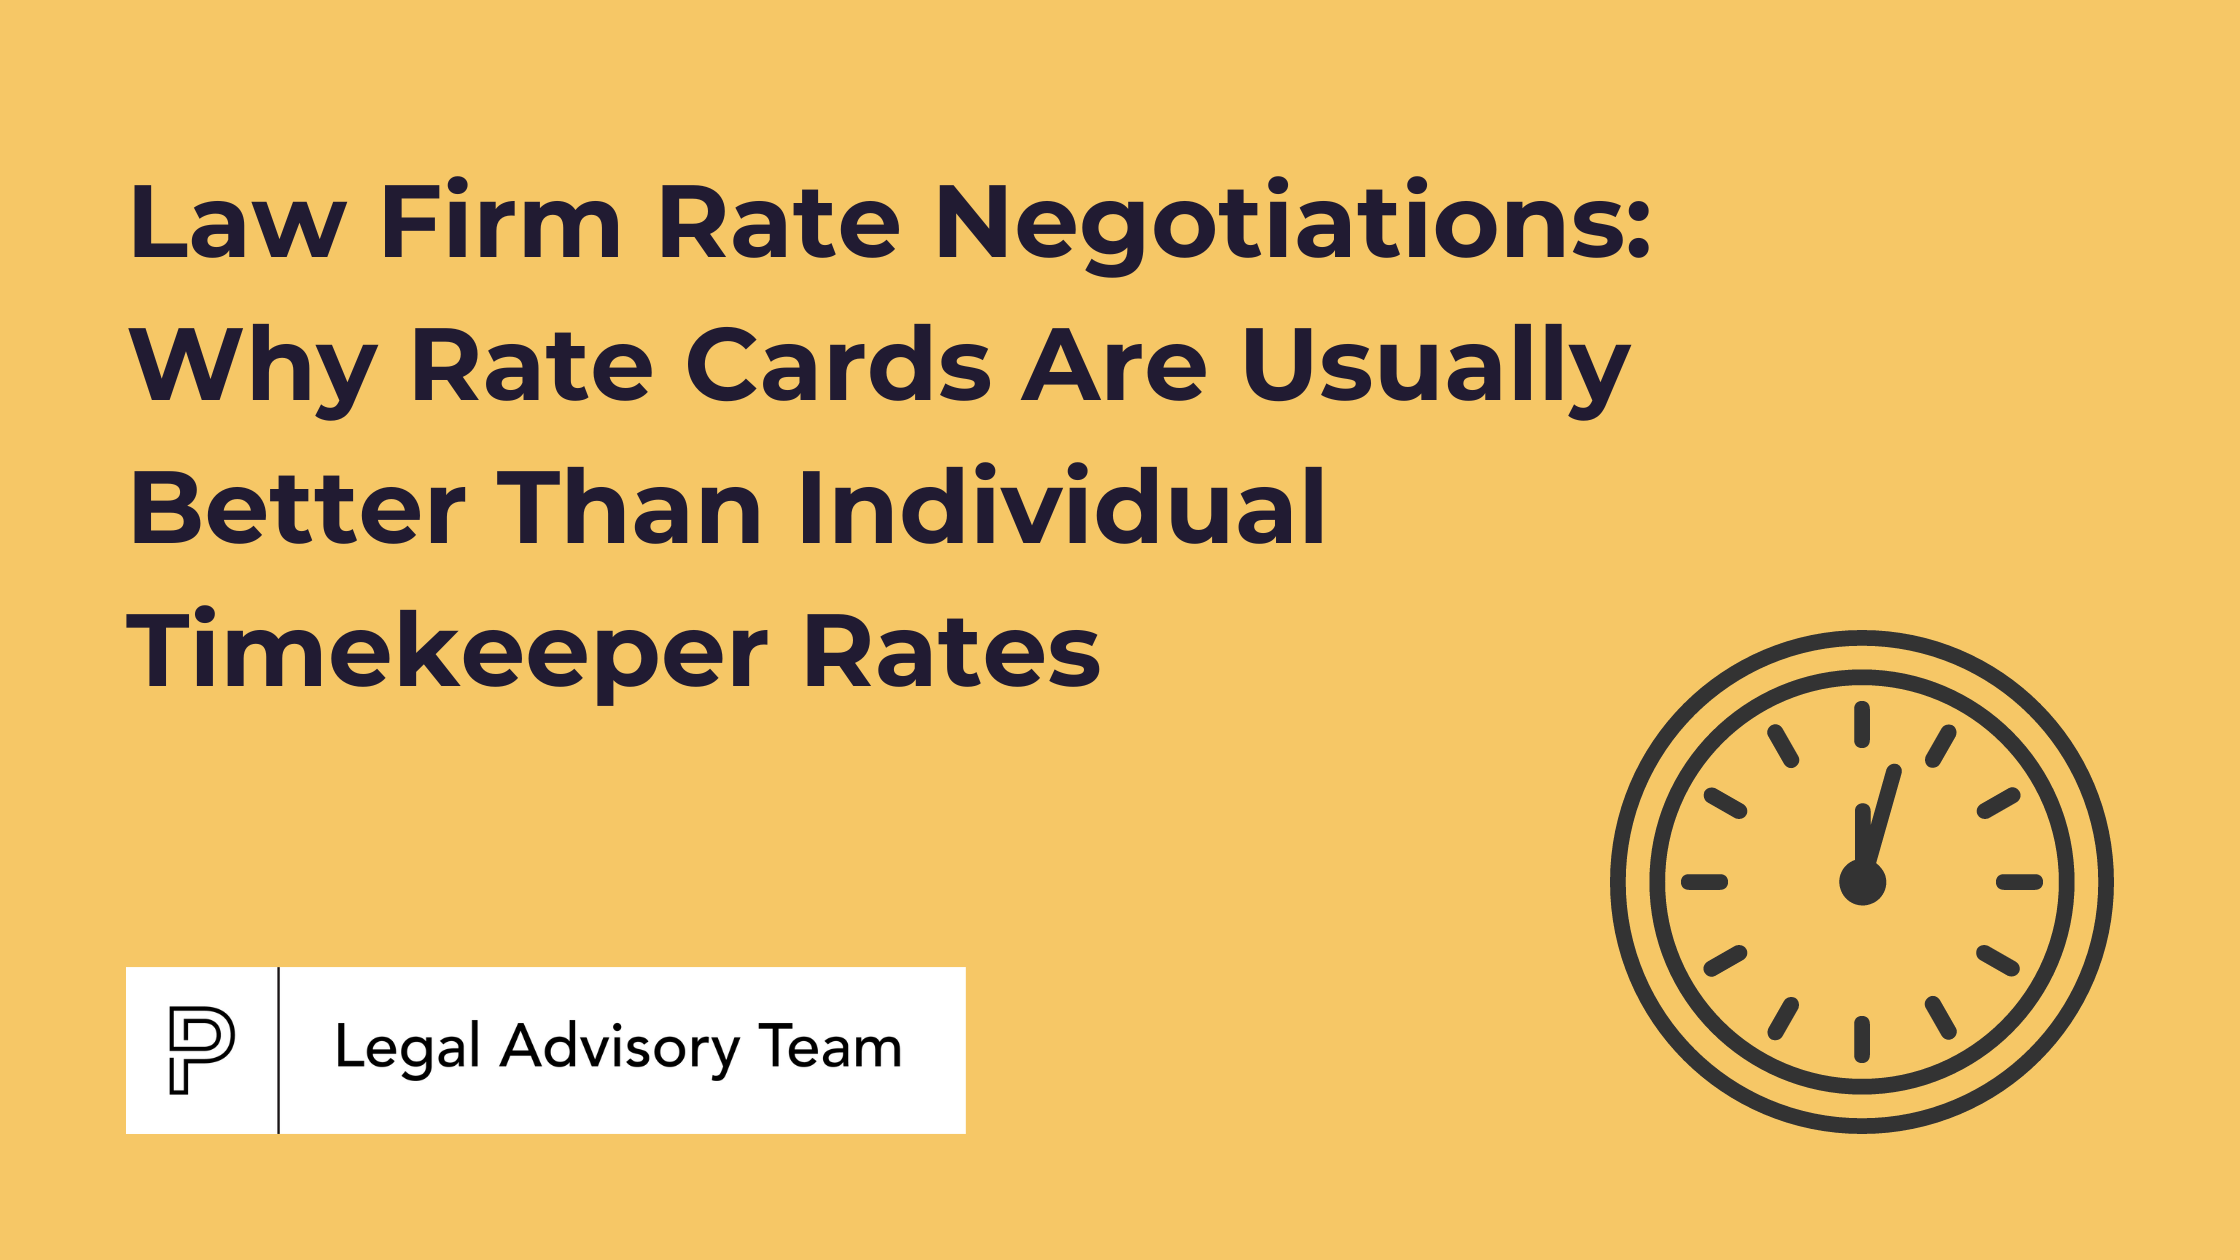 Law Firm Rate Negotiations: Why Rate Cards Are Usually Better Than Individual Timekeeper Rates